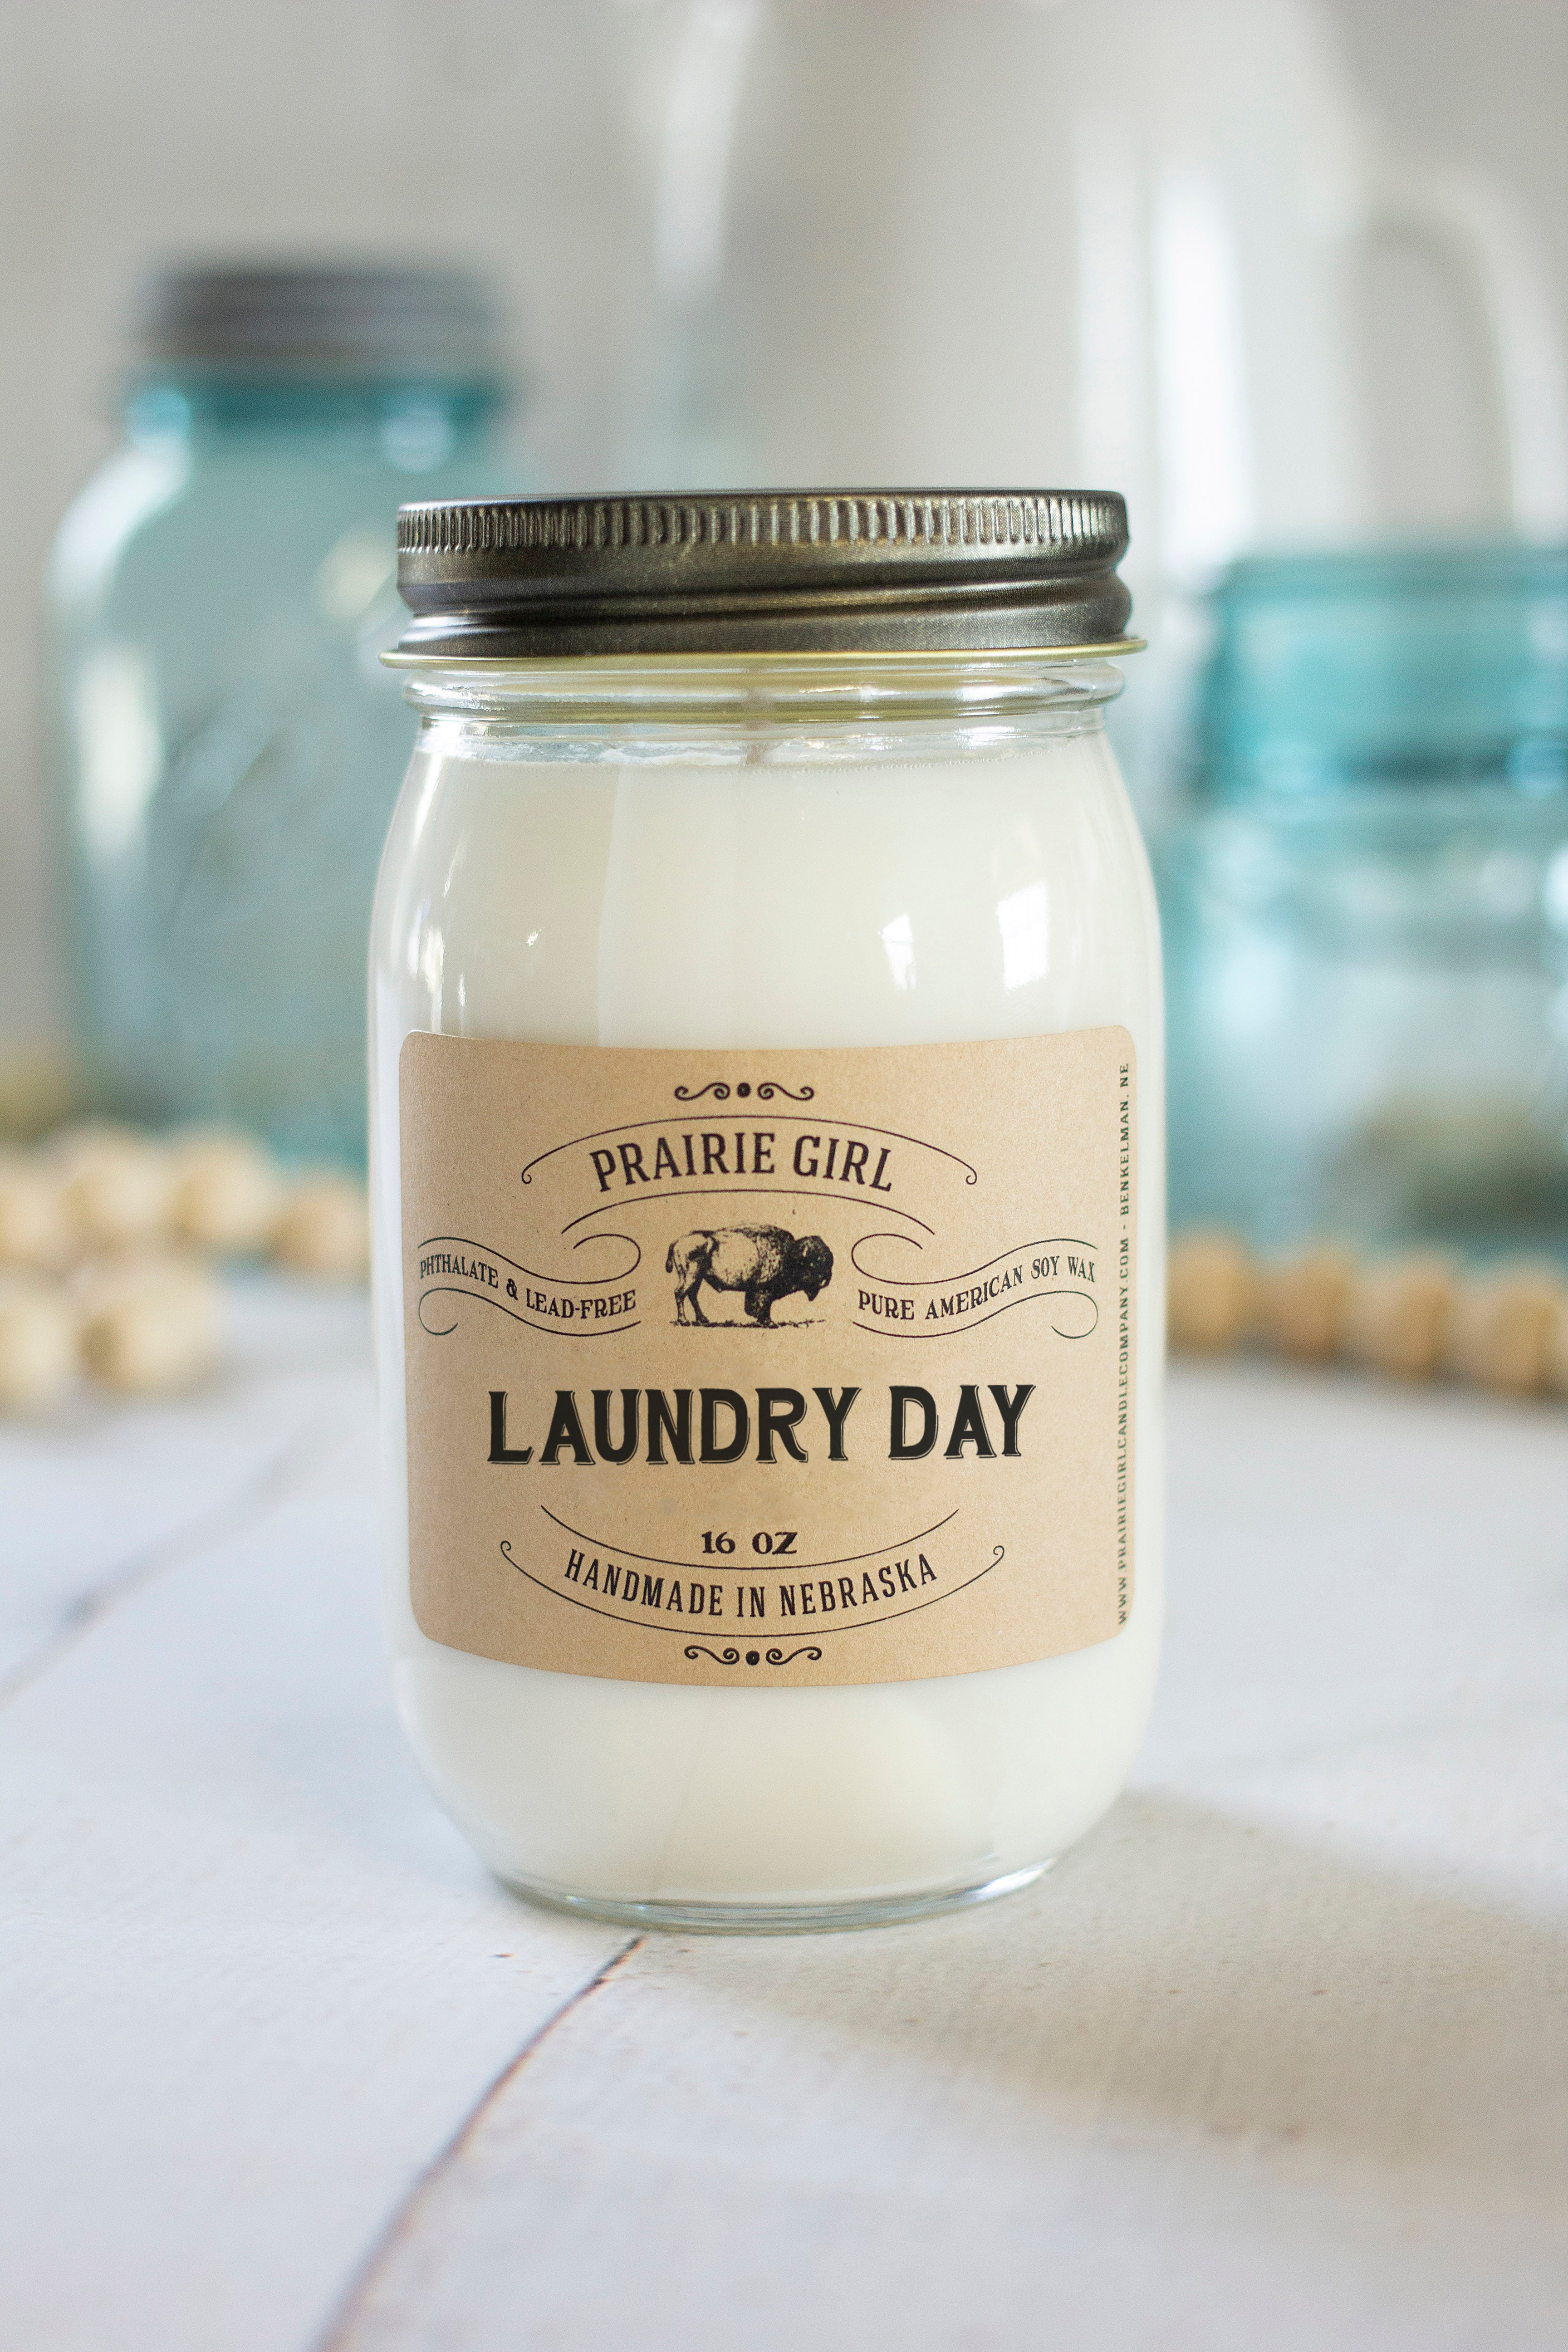 LAUNDRY DAY Scented Candle handmade Soy Wax Candles Hand Poured